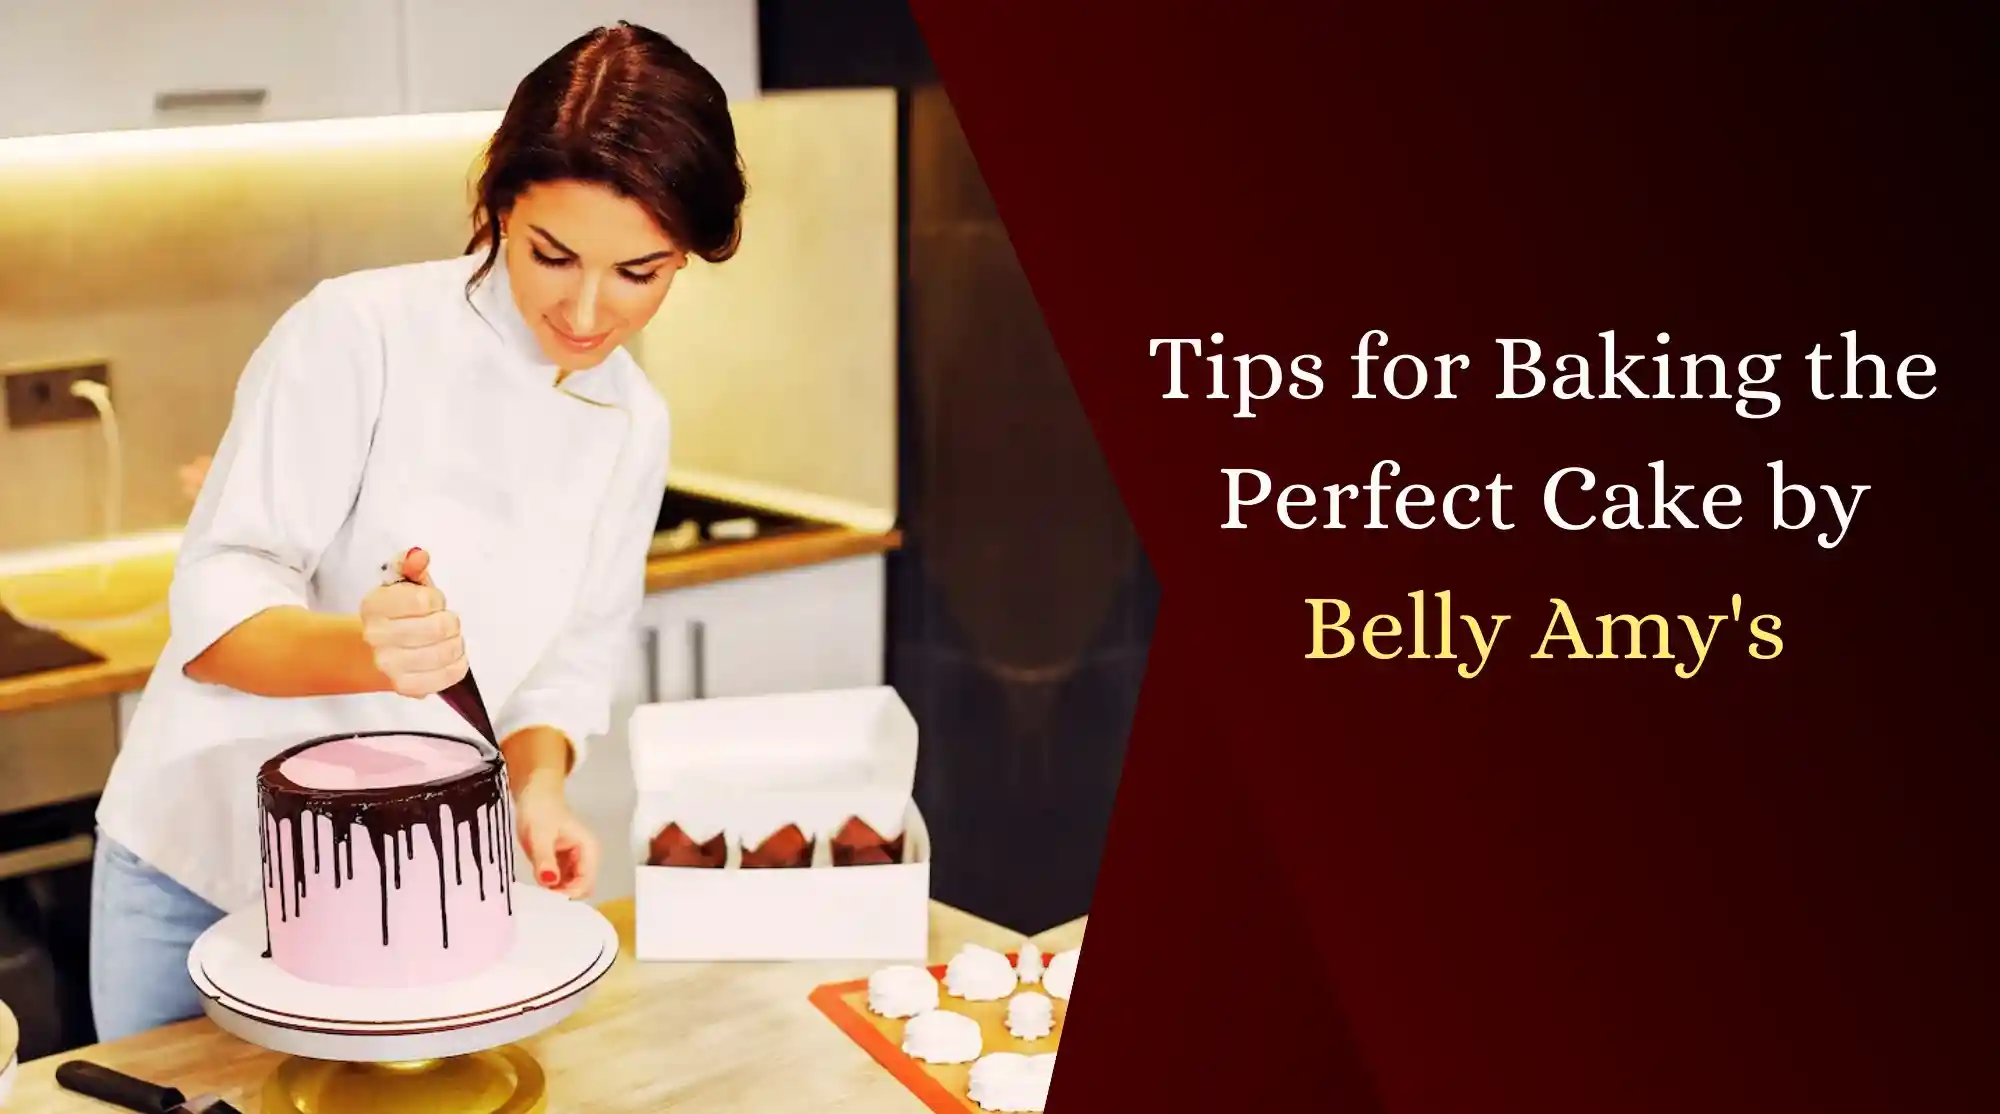 Tips for Baking the Perfect Cake by Belly Amy's